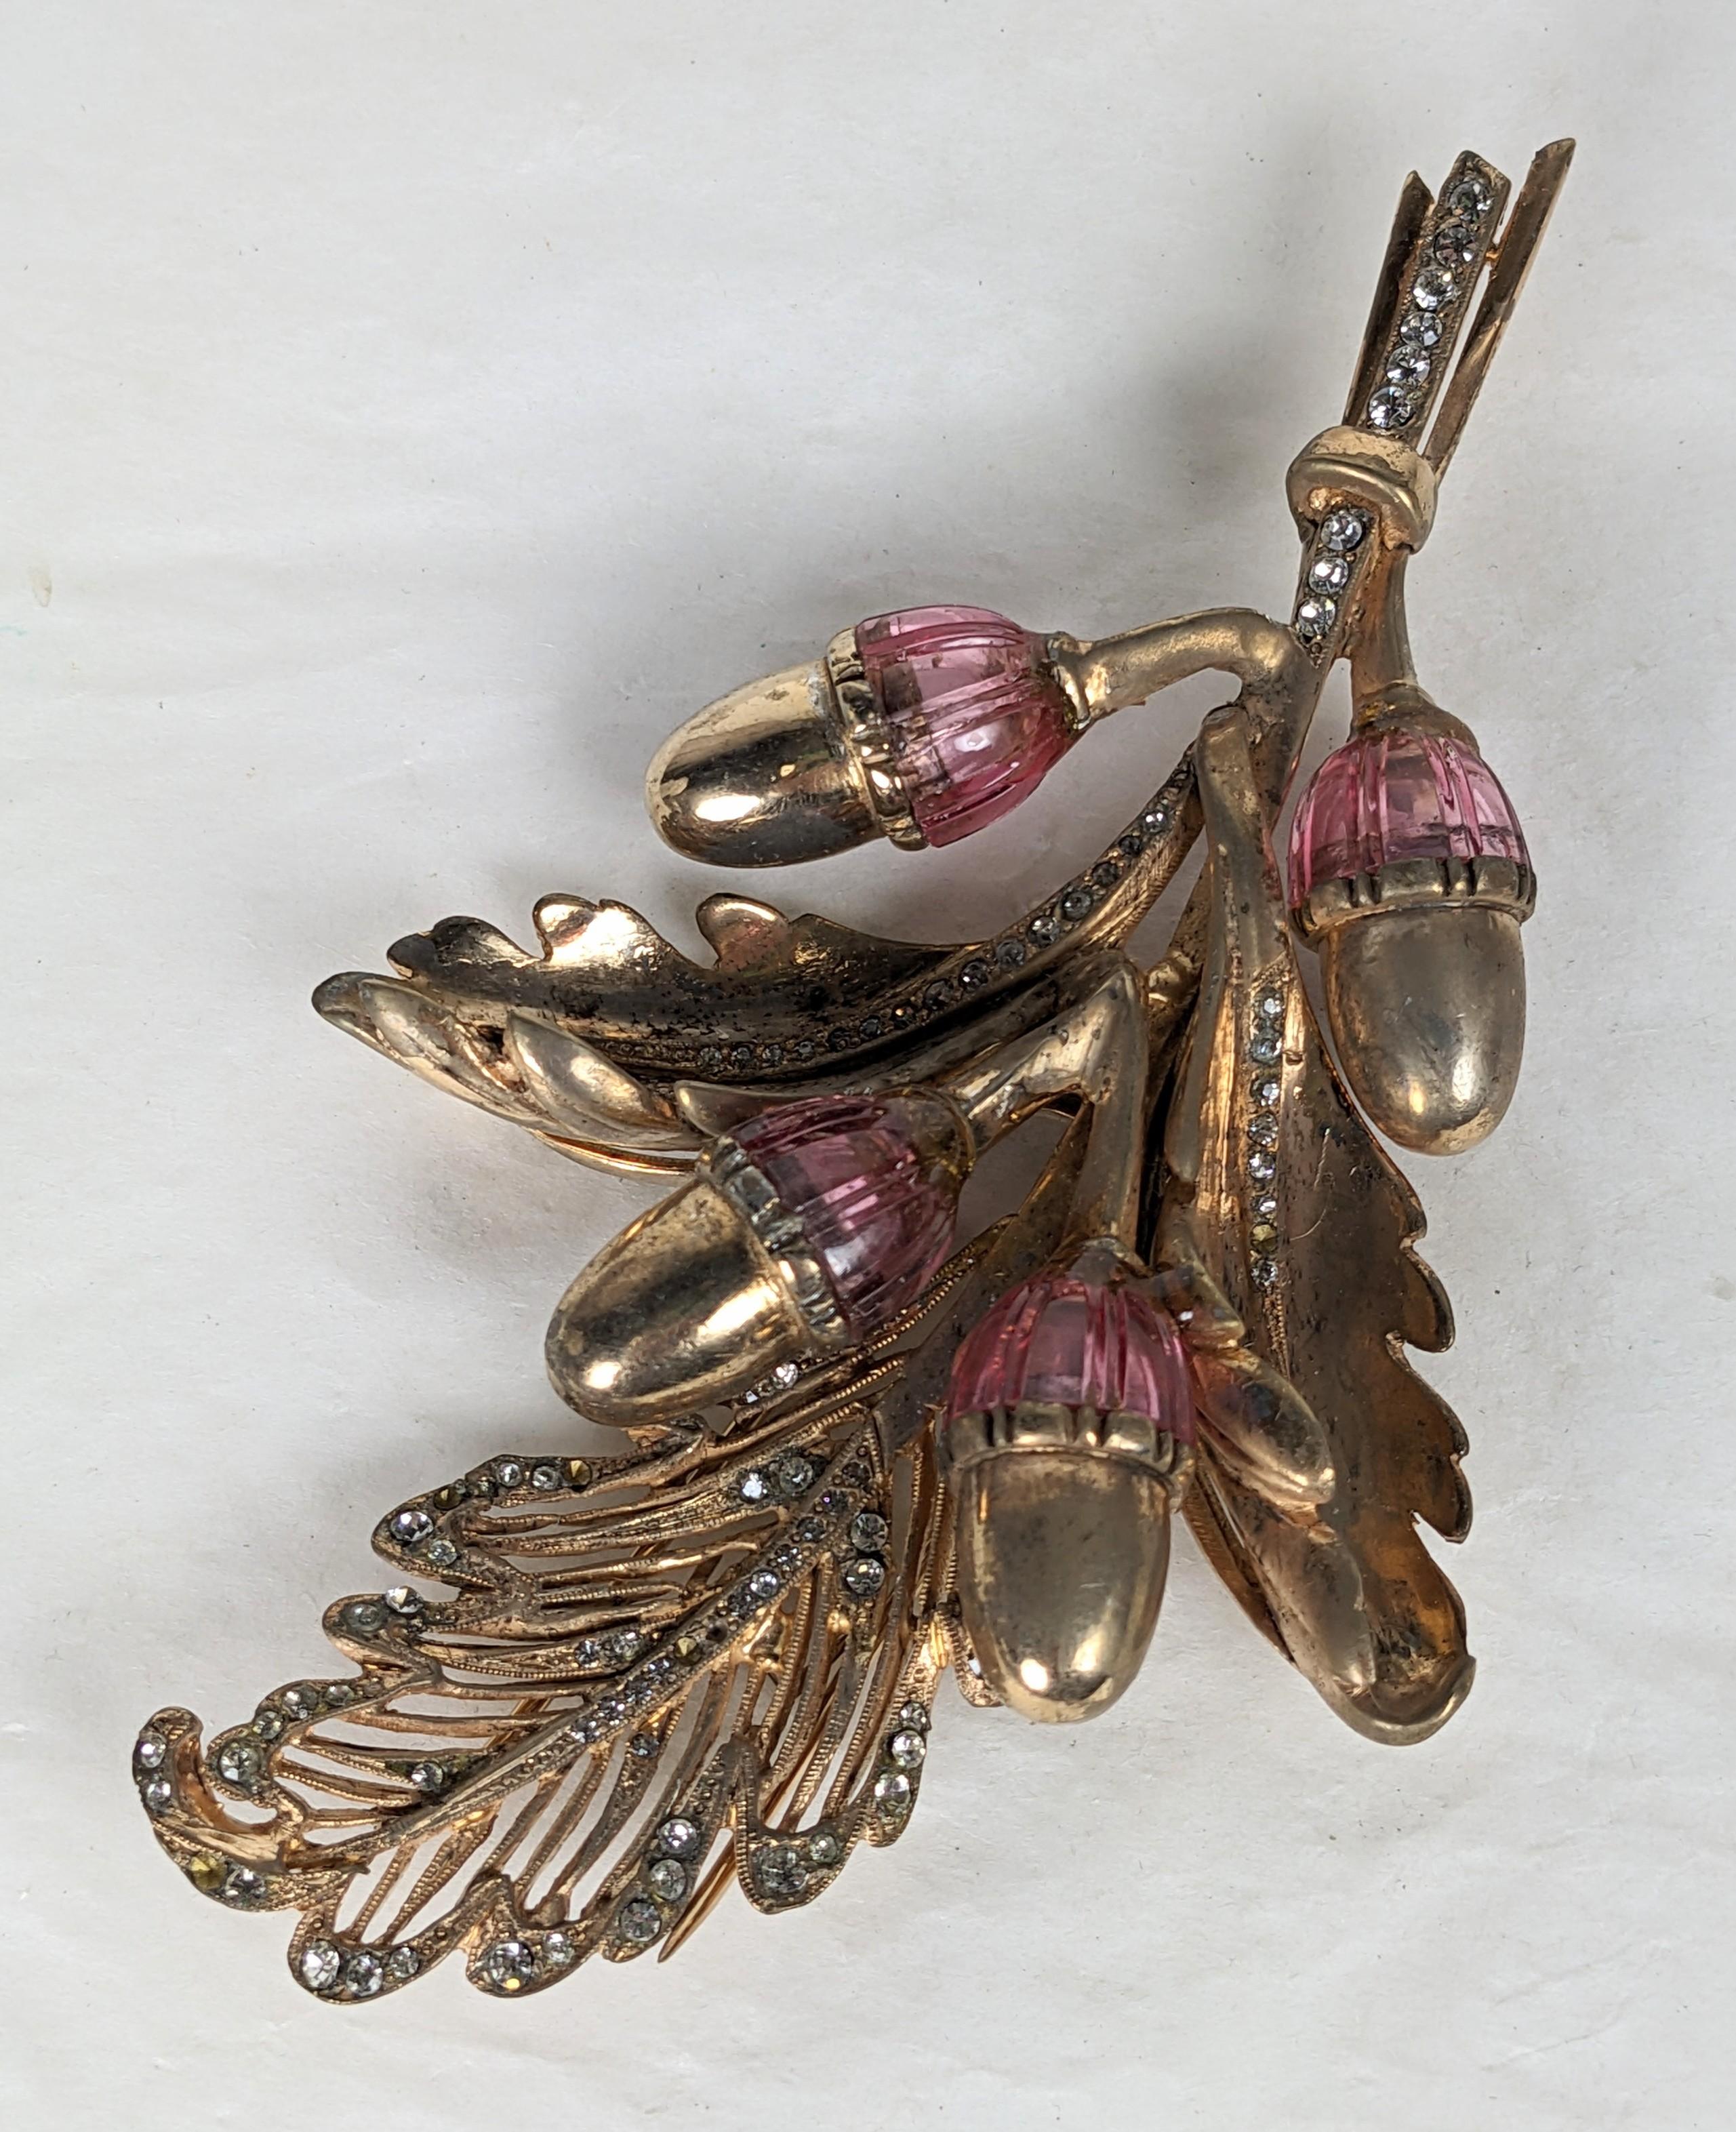 Large and unusual DeRosa Retro Lucite Acorn Clip from the 1940's. Gilt metal with pink lucite scored caps in a retro acorn design. Pave crystal detailing along spine and within pierced leaf. 4.5